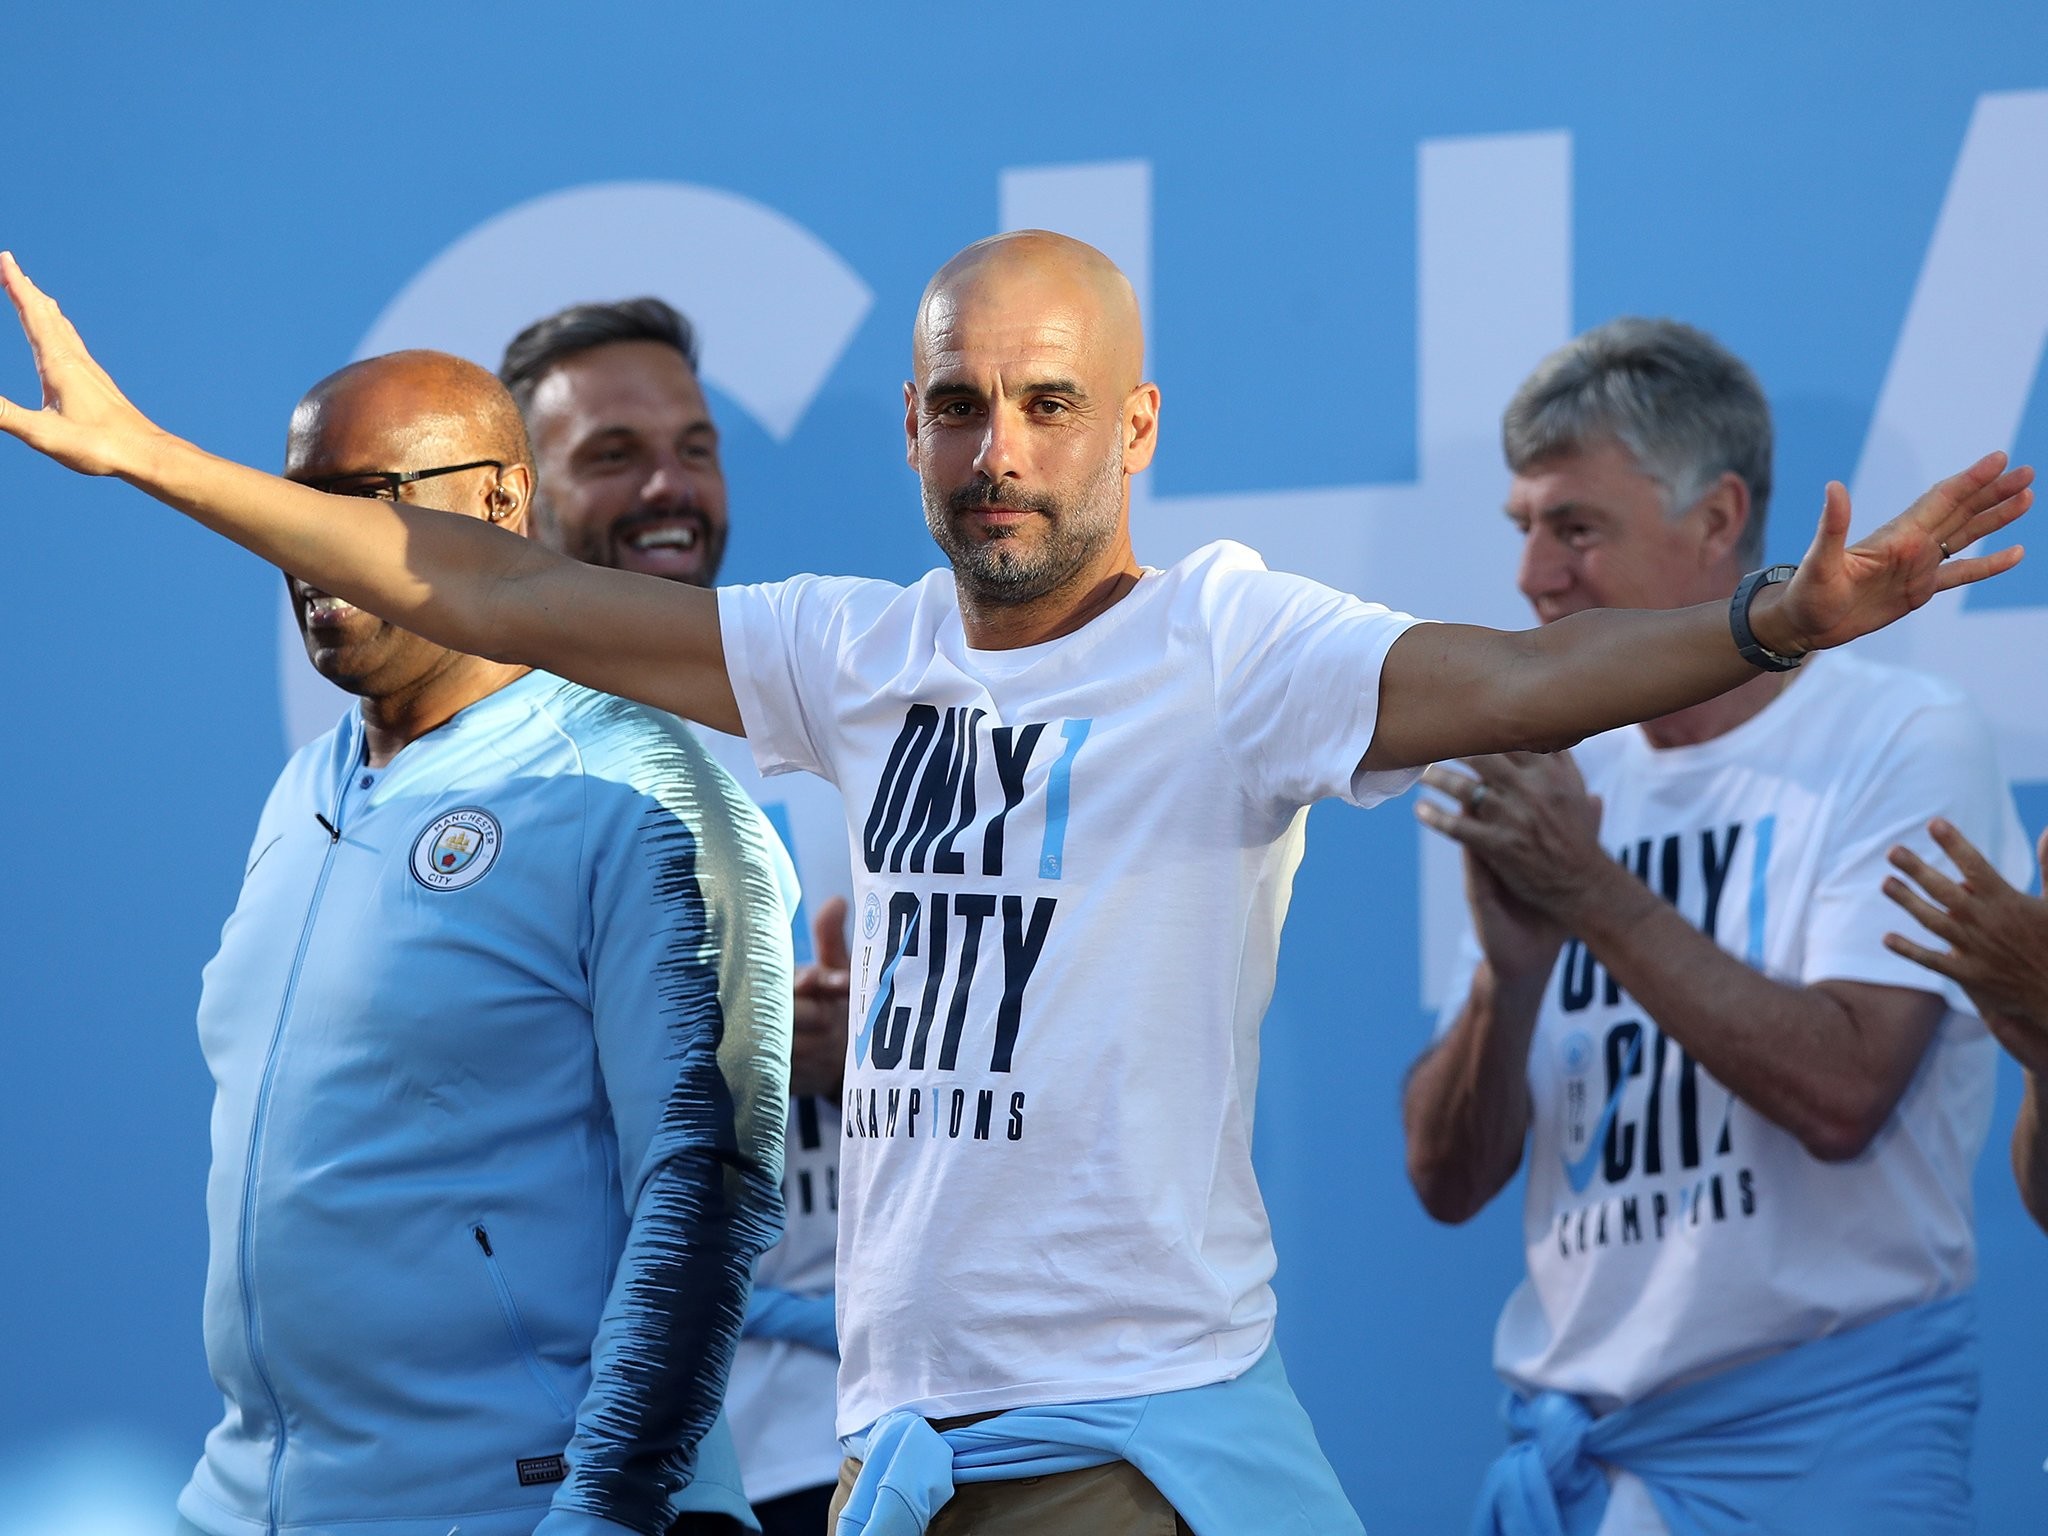 2048x1536 Manchester City 2018/19 fixtures: Premier League champions start season  against Arsenal in tough opener | The Independent